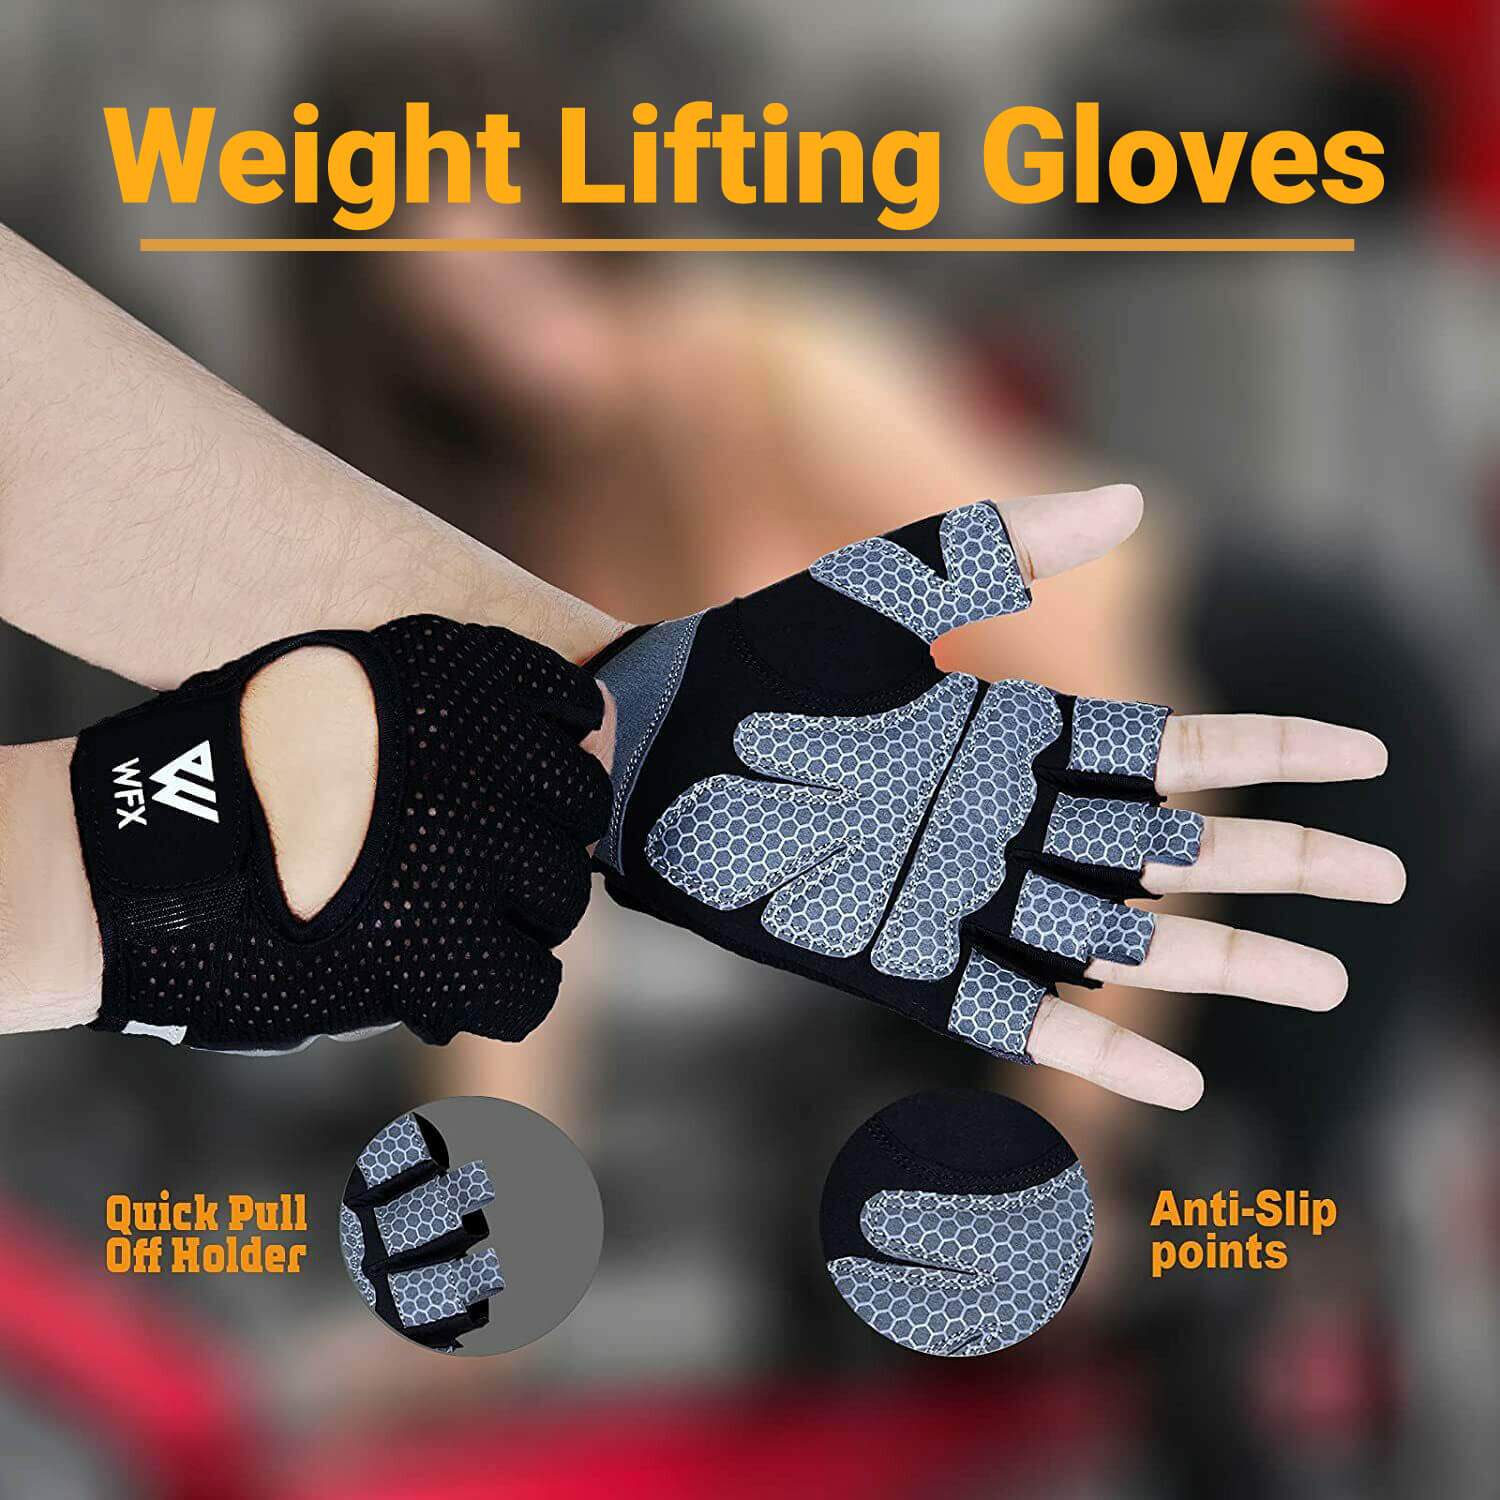 Weight Lifting Gloves for Men and Women - Best Gym Gloves